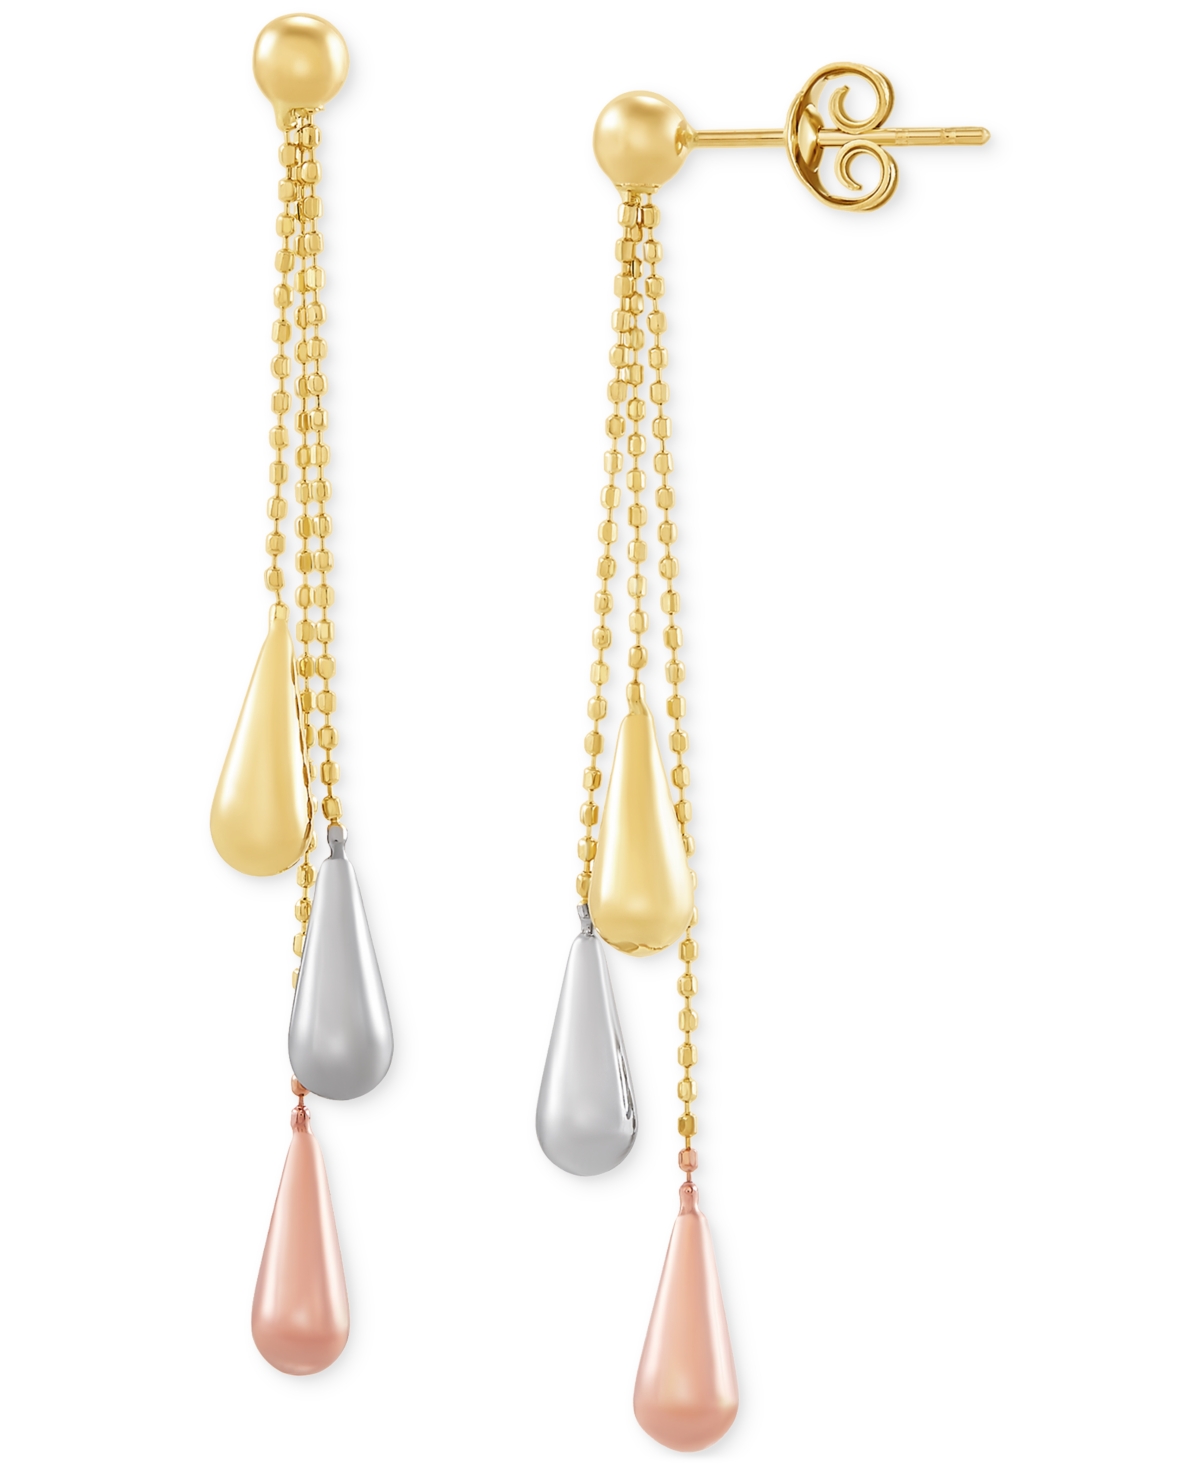 Tri-Gold Linear Drop Earrings in 14k Gold, White Gold and Rose Gold, 2 inch - Tri-Tone